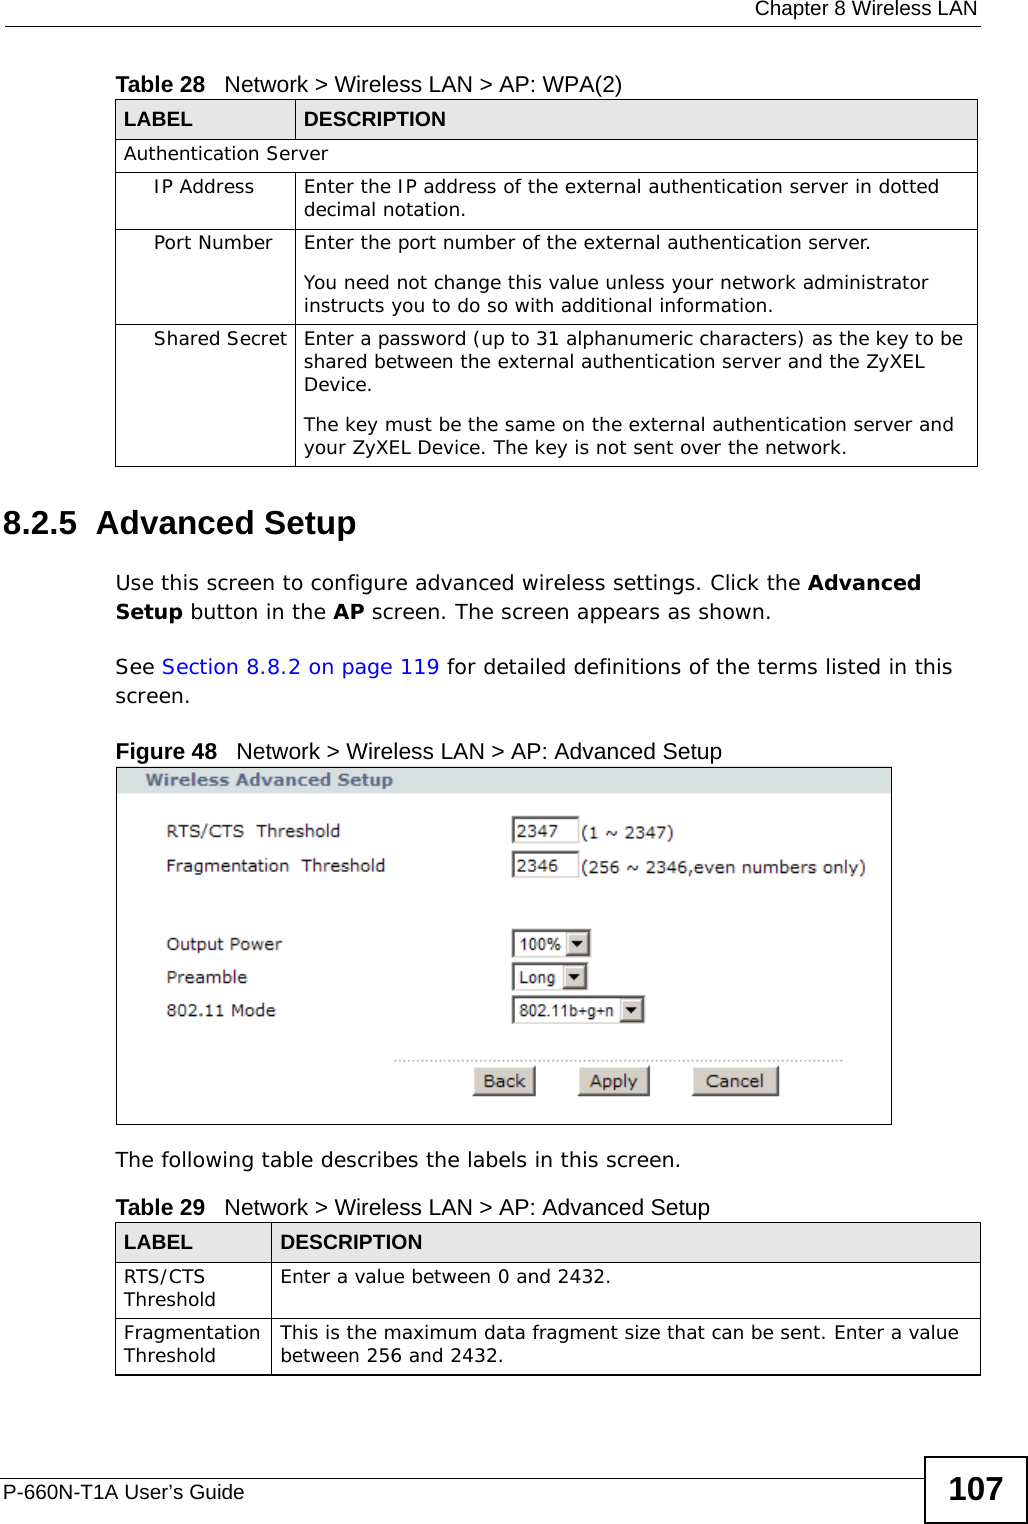  Chapter 8 Wireless LANP-660N-T1A User’s Guide 1078.2.5  Advanced SetupUse this screen to configure advanced wireless settings. Click the Advanced Setup button in the AP screen. The screen appears as shown.See Section 8.8.2 on page 119 for detailed definitions of the terms listed in this screen.Figure 48   Network &gt; Wireless LAN &gt; AP: Advanced SetupThe following table describes the labels in this screen. Authentication ServerIP Address Enter the IP address of the external authentication server in dotted decimal notation.Port Number Enter the port number of the external authentication server.You need not change this value unless your network administrator instructs you to do so with additional information. Shared Secret Enter a password (up to 31 alphanumeric characters) as the key to be shared between the external authentication server and the ZyXEL Device.The key must be the same on the external authentication server and your ZyXEL Device. The key is not sent over the network. Table 28   Network &gt; Wireless LAN &gt; AP: WPA(2)LABEL DESCRIPTIONTable 29   Network &gt; Wireless LAN &gt; AP: Advanced SetupLABEL DESCRIPTIONRTS/CTS Threshold Enter a value between 0 and 2432. Fragmentation Threshold This is the maximum data fragment size that can be sent. Enter a value between 256 and 2432. 